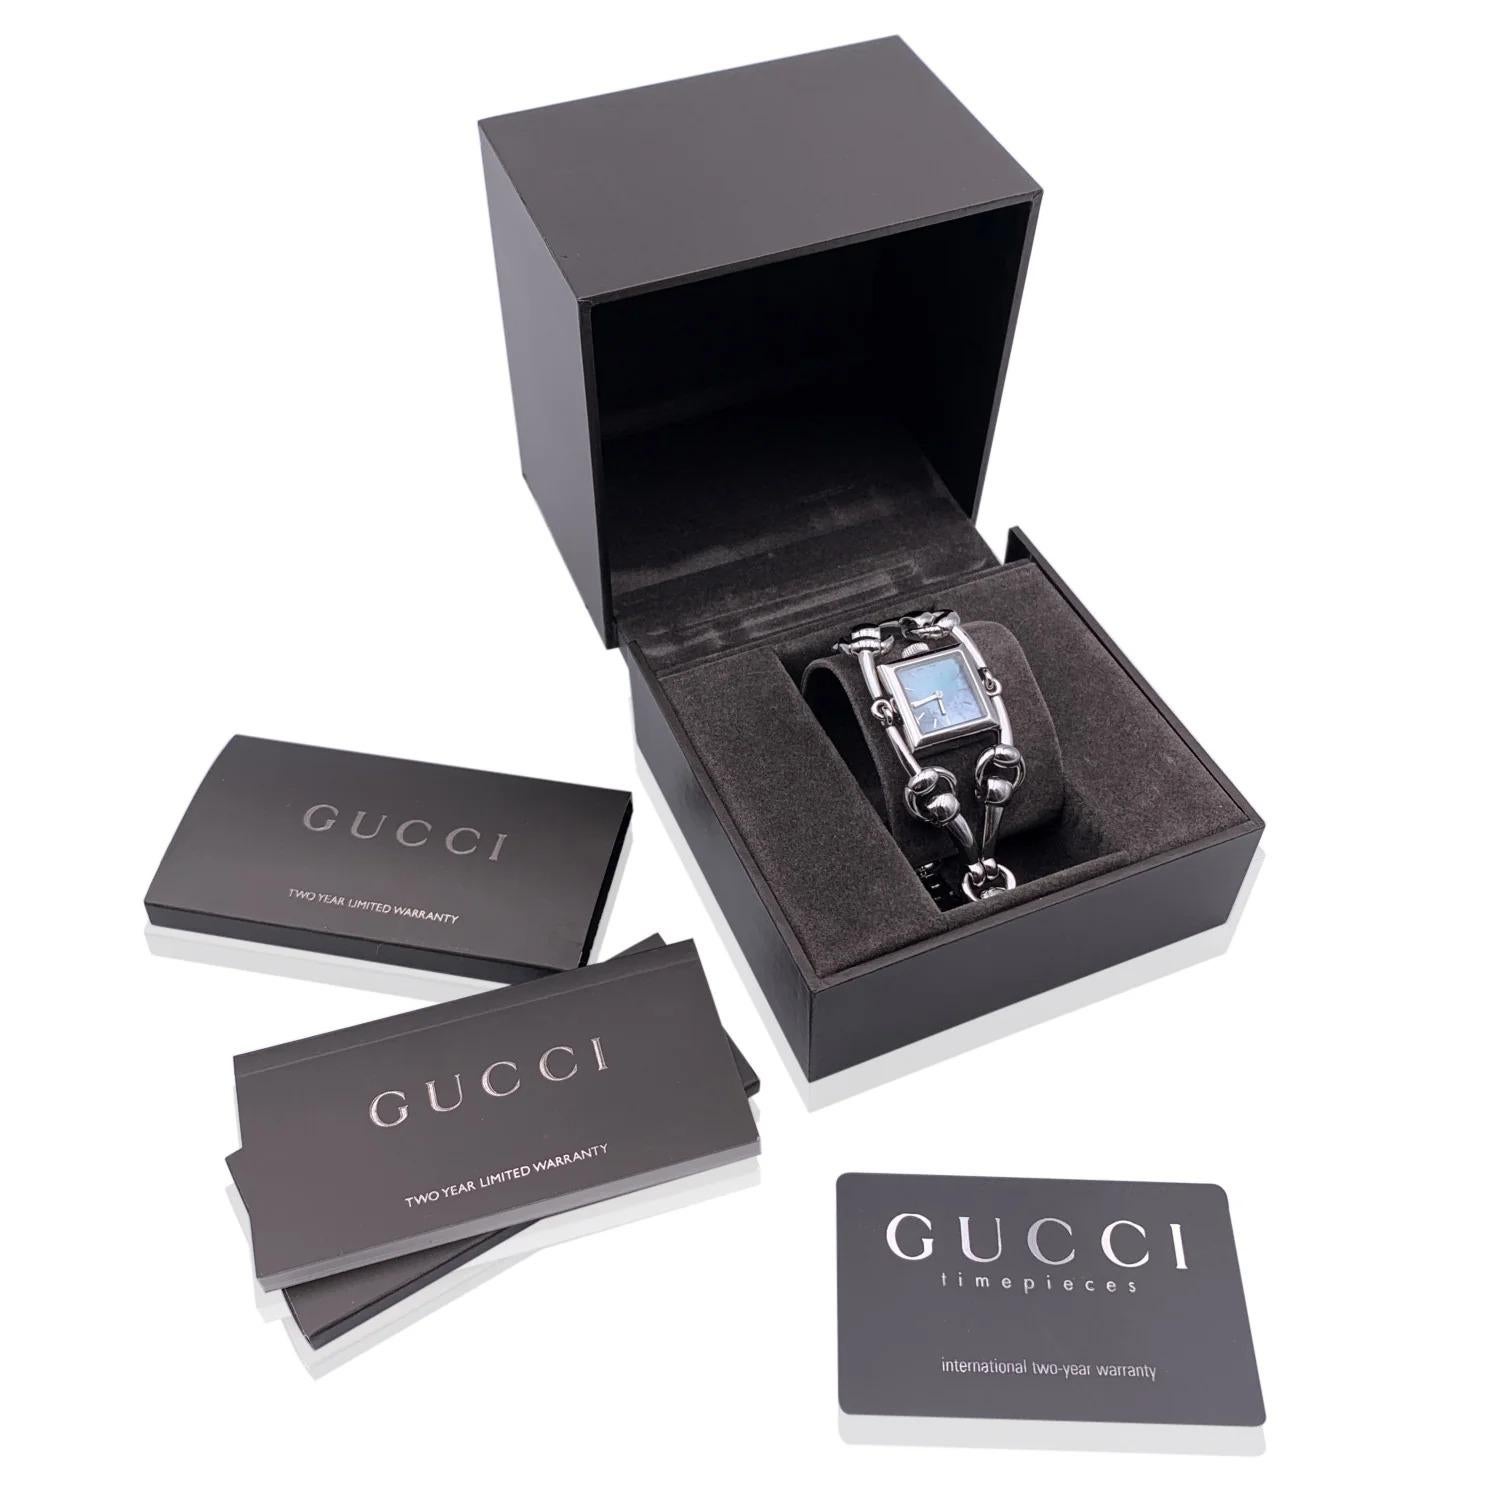 Gucci Mod. 'Signoria - 116.5' stainless steel wrist watch. Stainless steel case. Square mother of Pearl dial in blue color. Sapphire crystal. Swiss Made. Quartz movement. Horsebit bracelet. Gucci written on face, clasp and reverse. Will fit up to